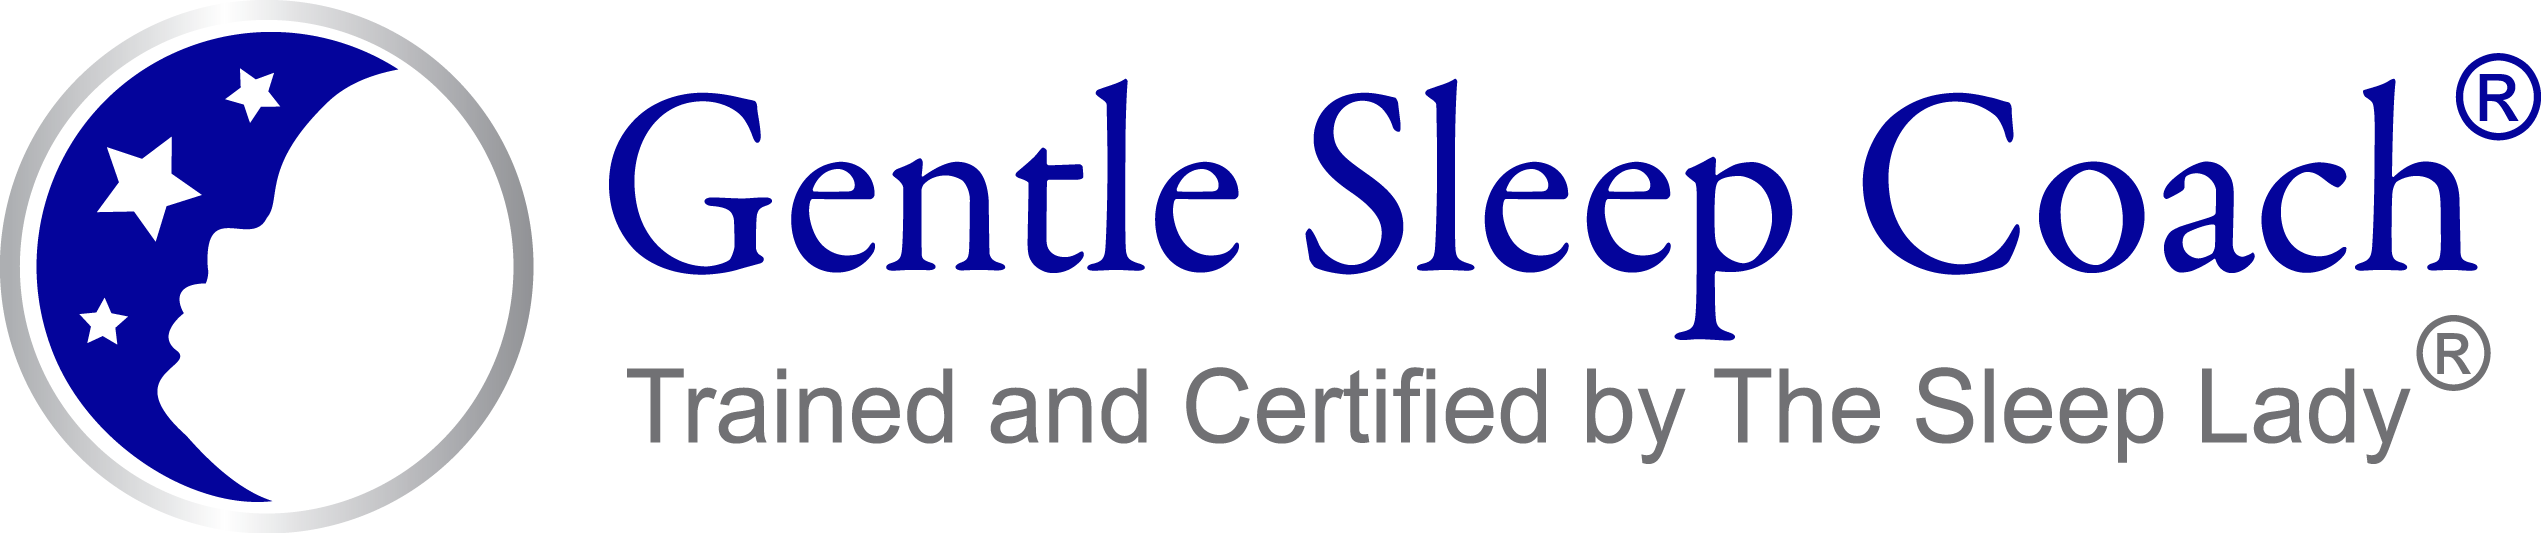 GSC logo png - Tips to successfully sleep train your child